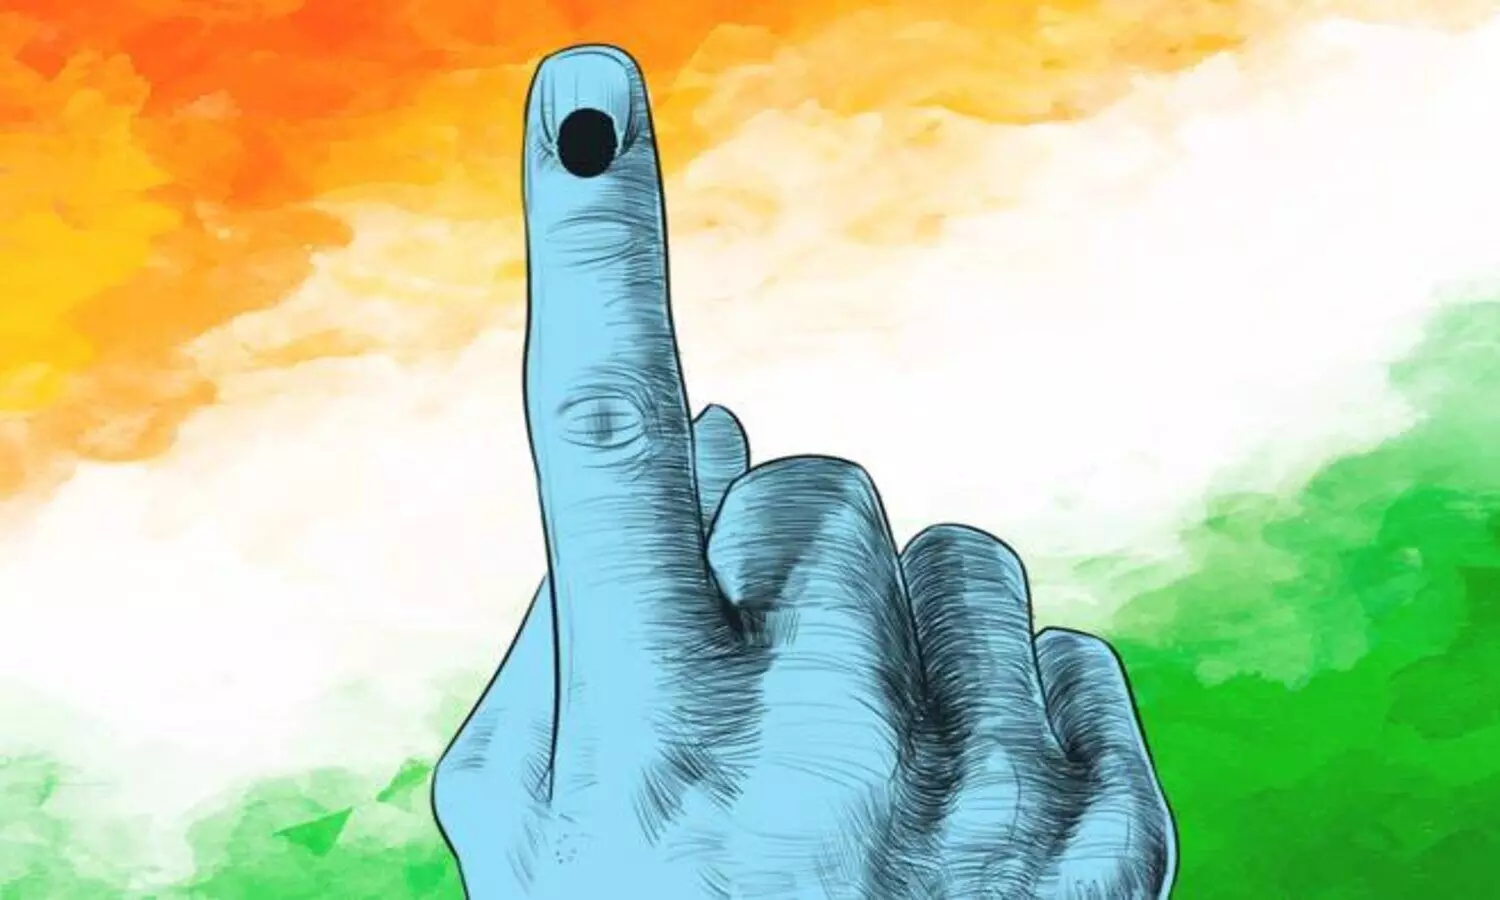 Rajasthan tops the country disposal of voter lists